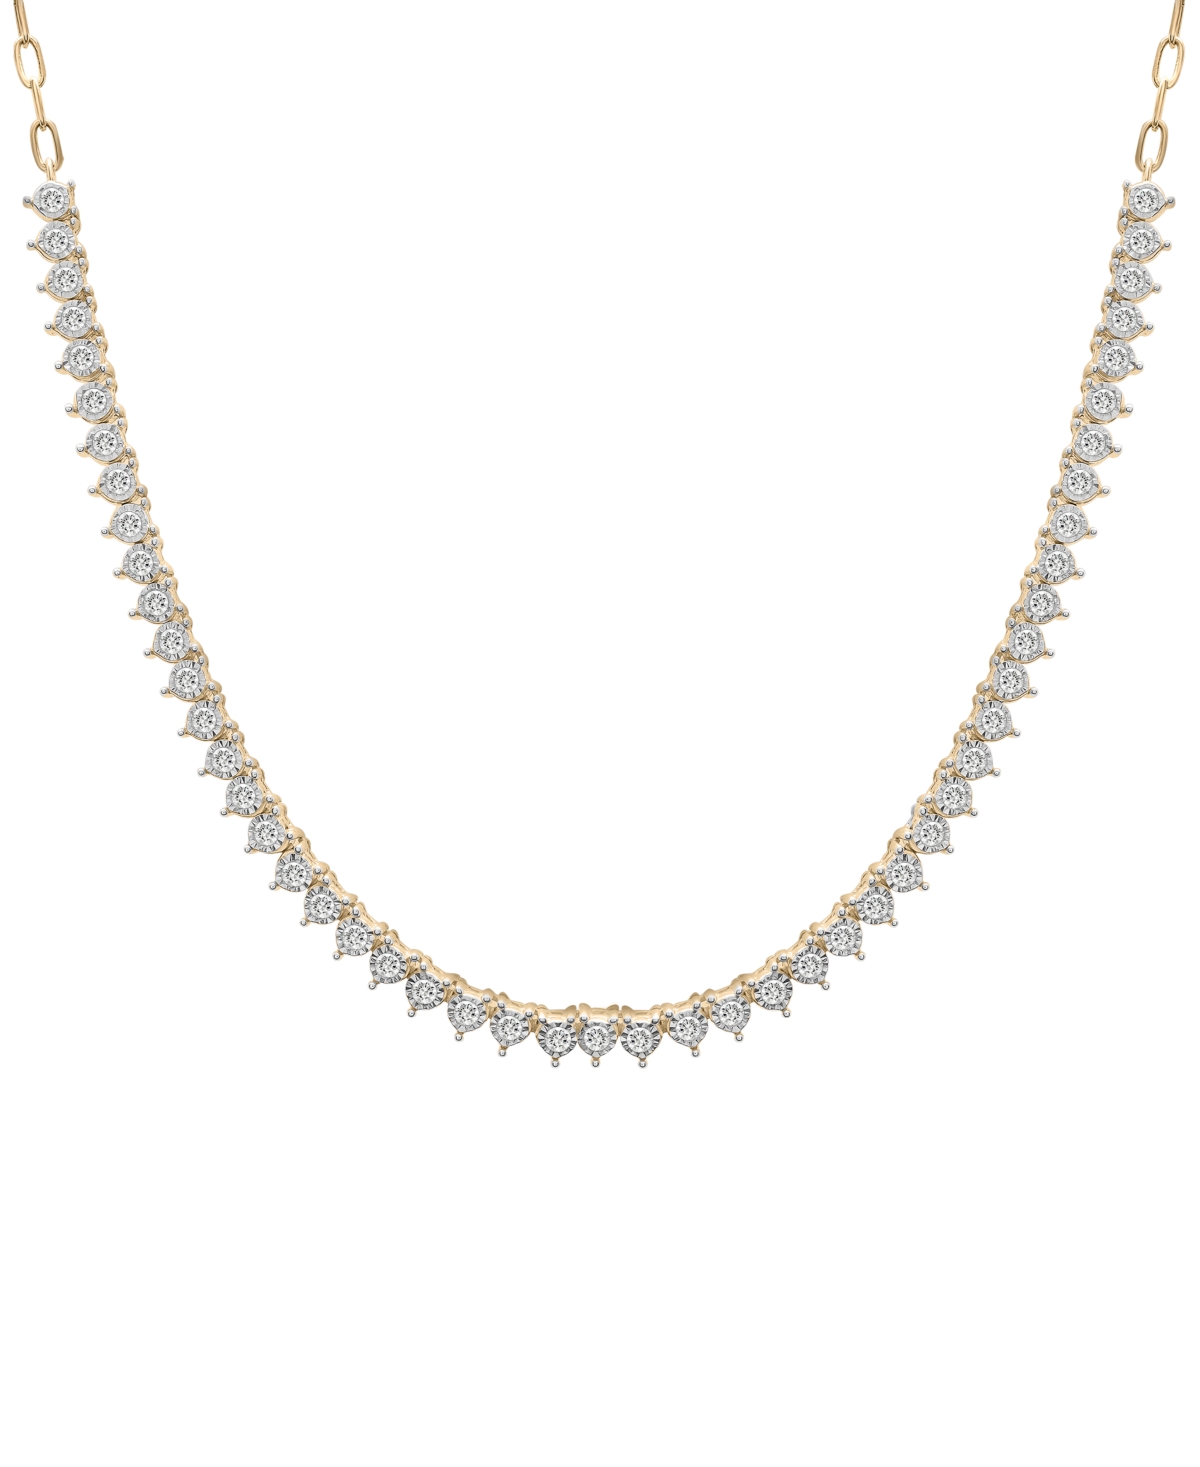 Diamond 16" Collar Necklace (1 ct. t.w.), Created for Macy's - Gold-Plated Sterling Silver